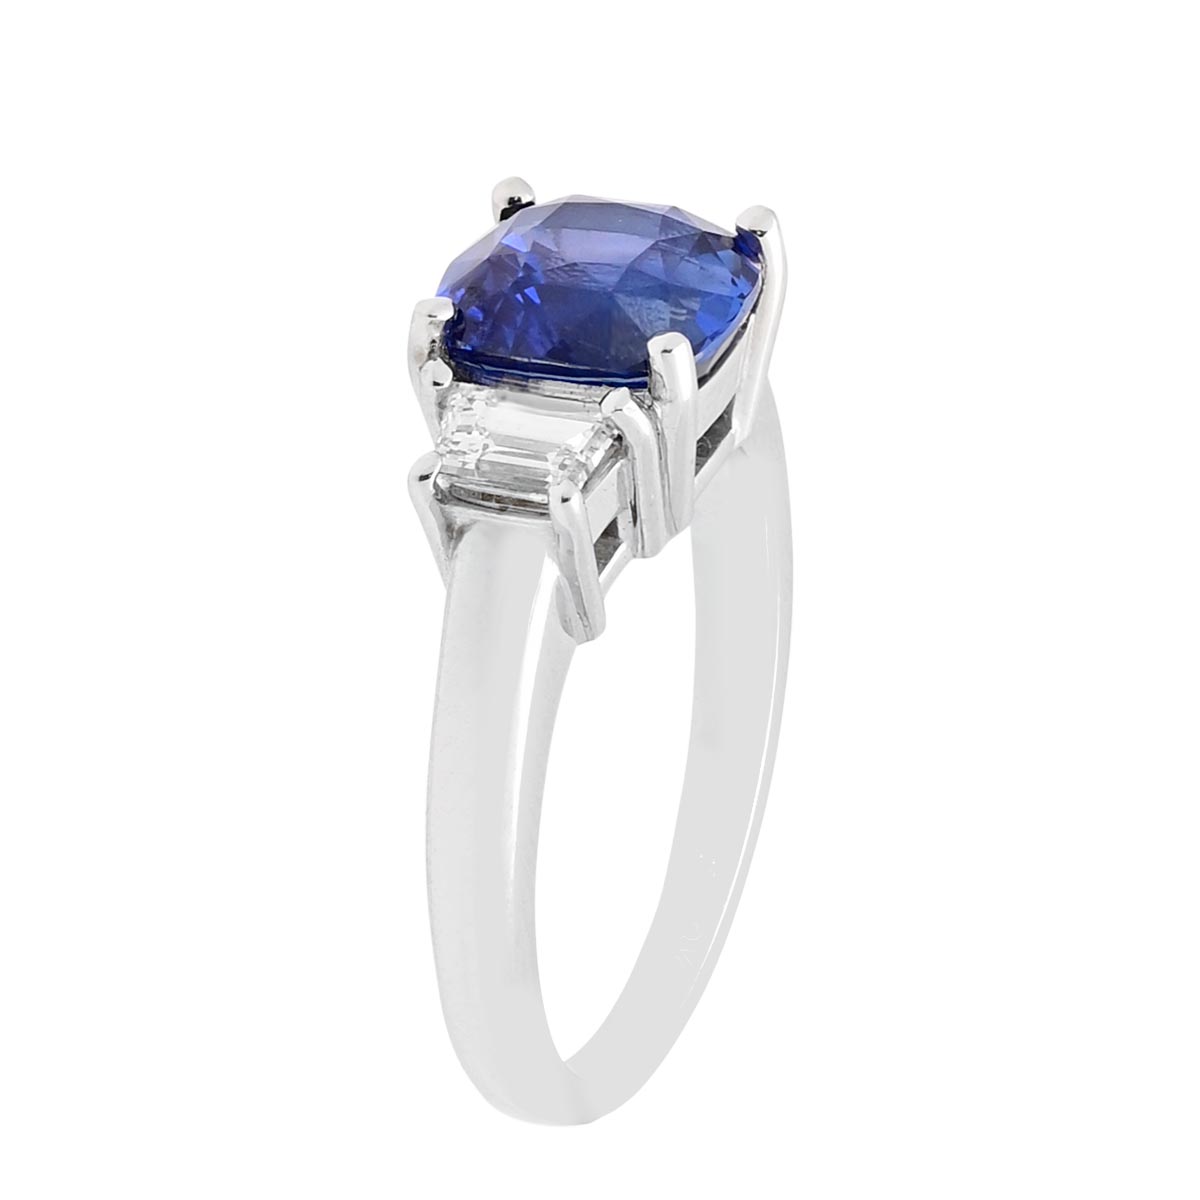 Cushion Cut Sapphire Ring in 18kt White Gold with Diamonds (5/8ct tw)